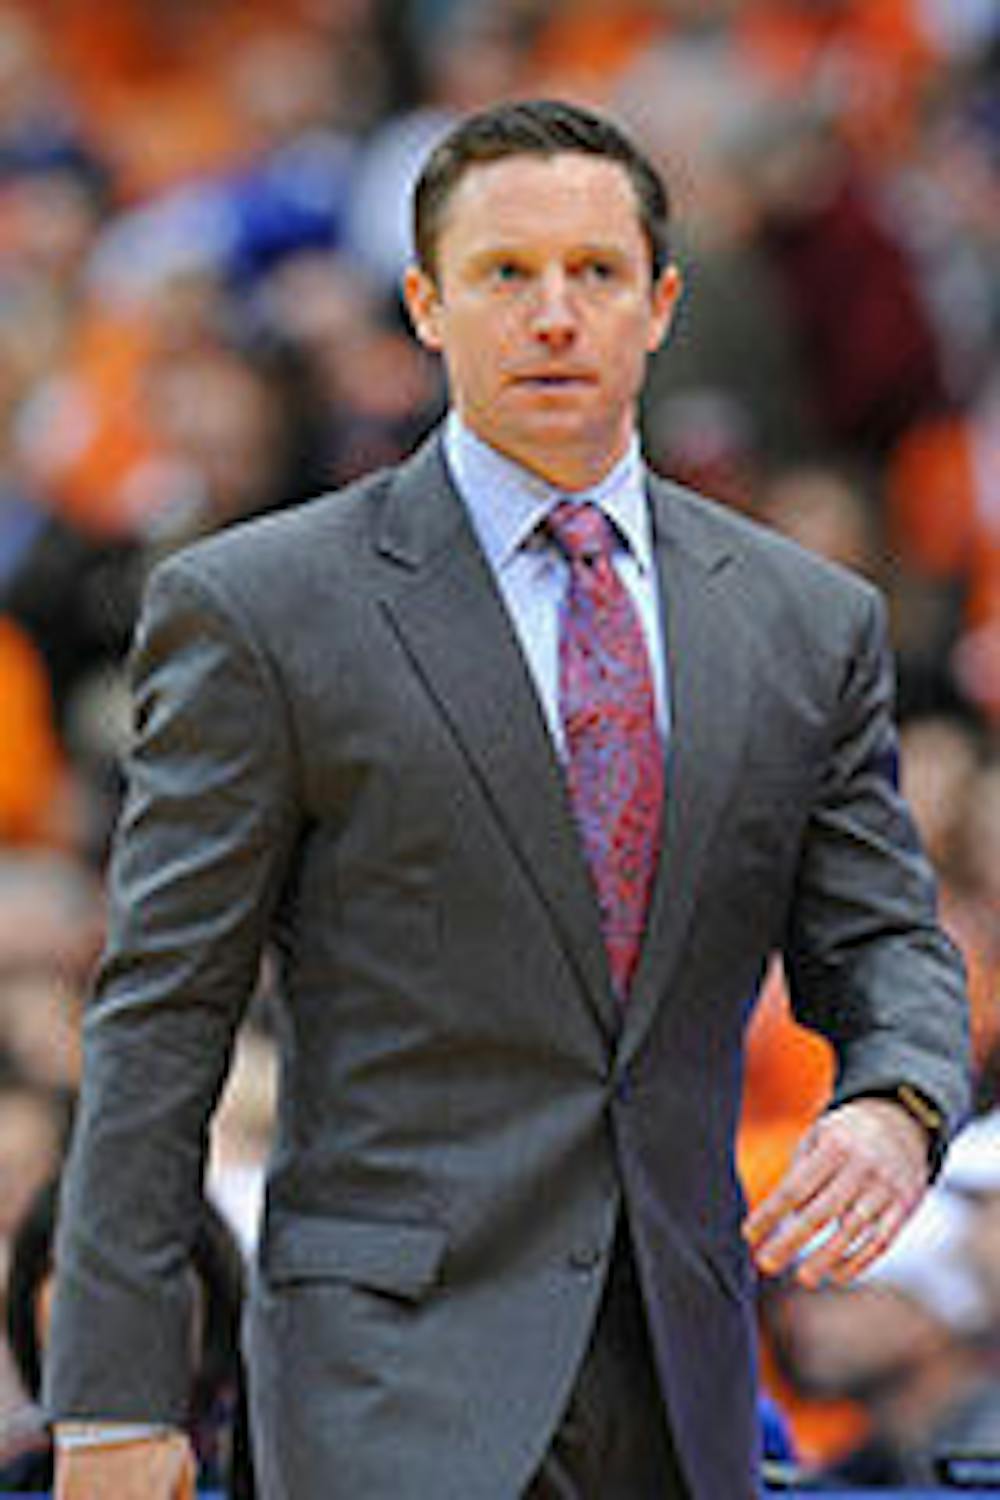 <p>Michael White, 38, was hired by the University of Florida to be the next head coach of the Gators men's basketball team, athletics director Jeremy Foley announced Thursday. White replaces former coach Billy Donovan, who left UF after 19 seasons to become the new head coach of the NBA's Oklahoma City Thunder.&nbsp;</p>